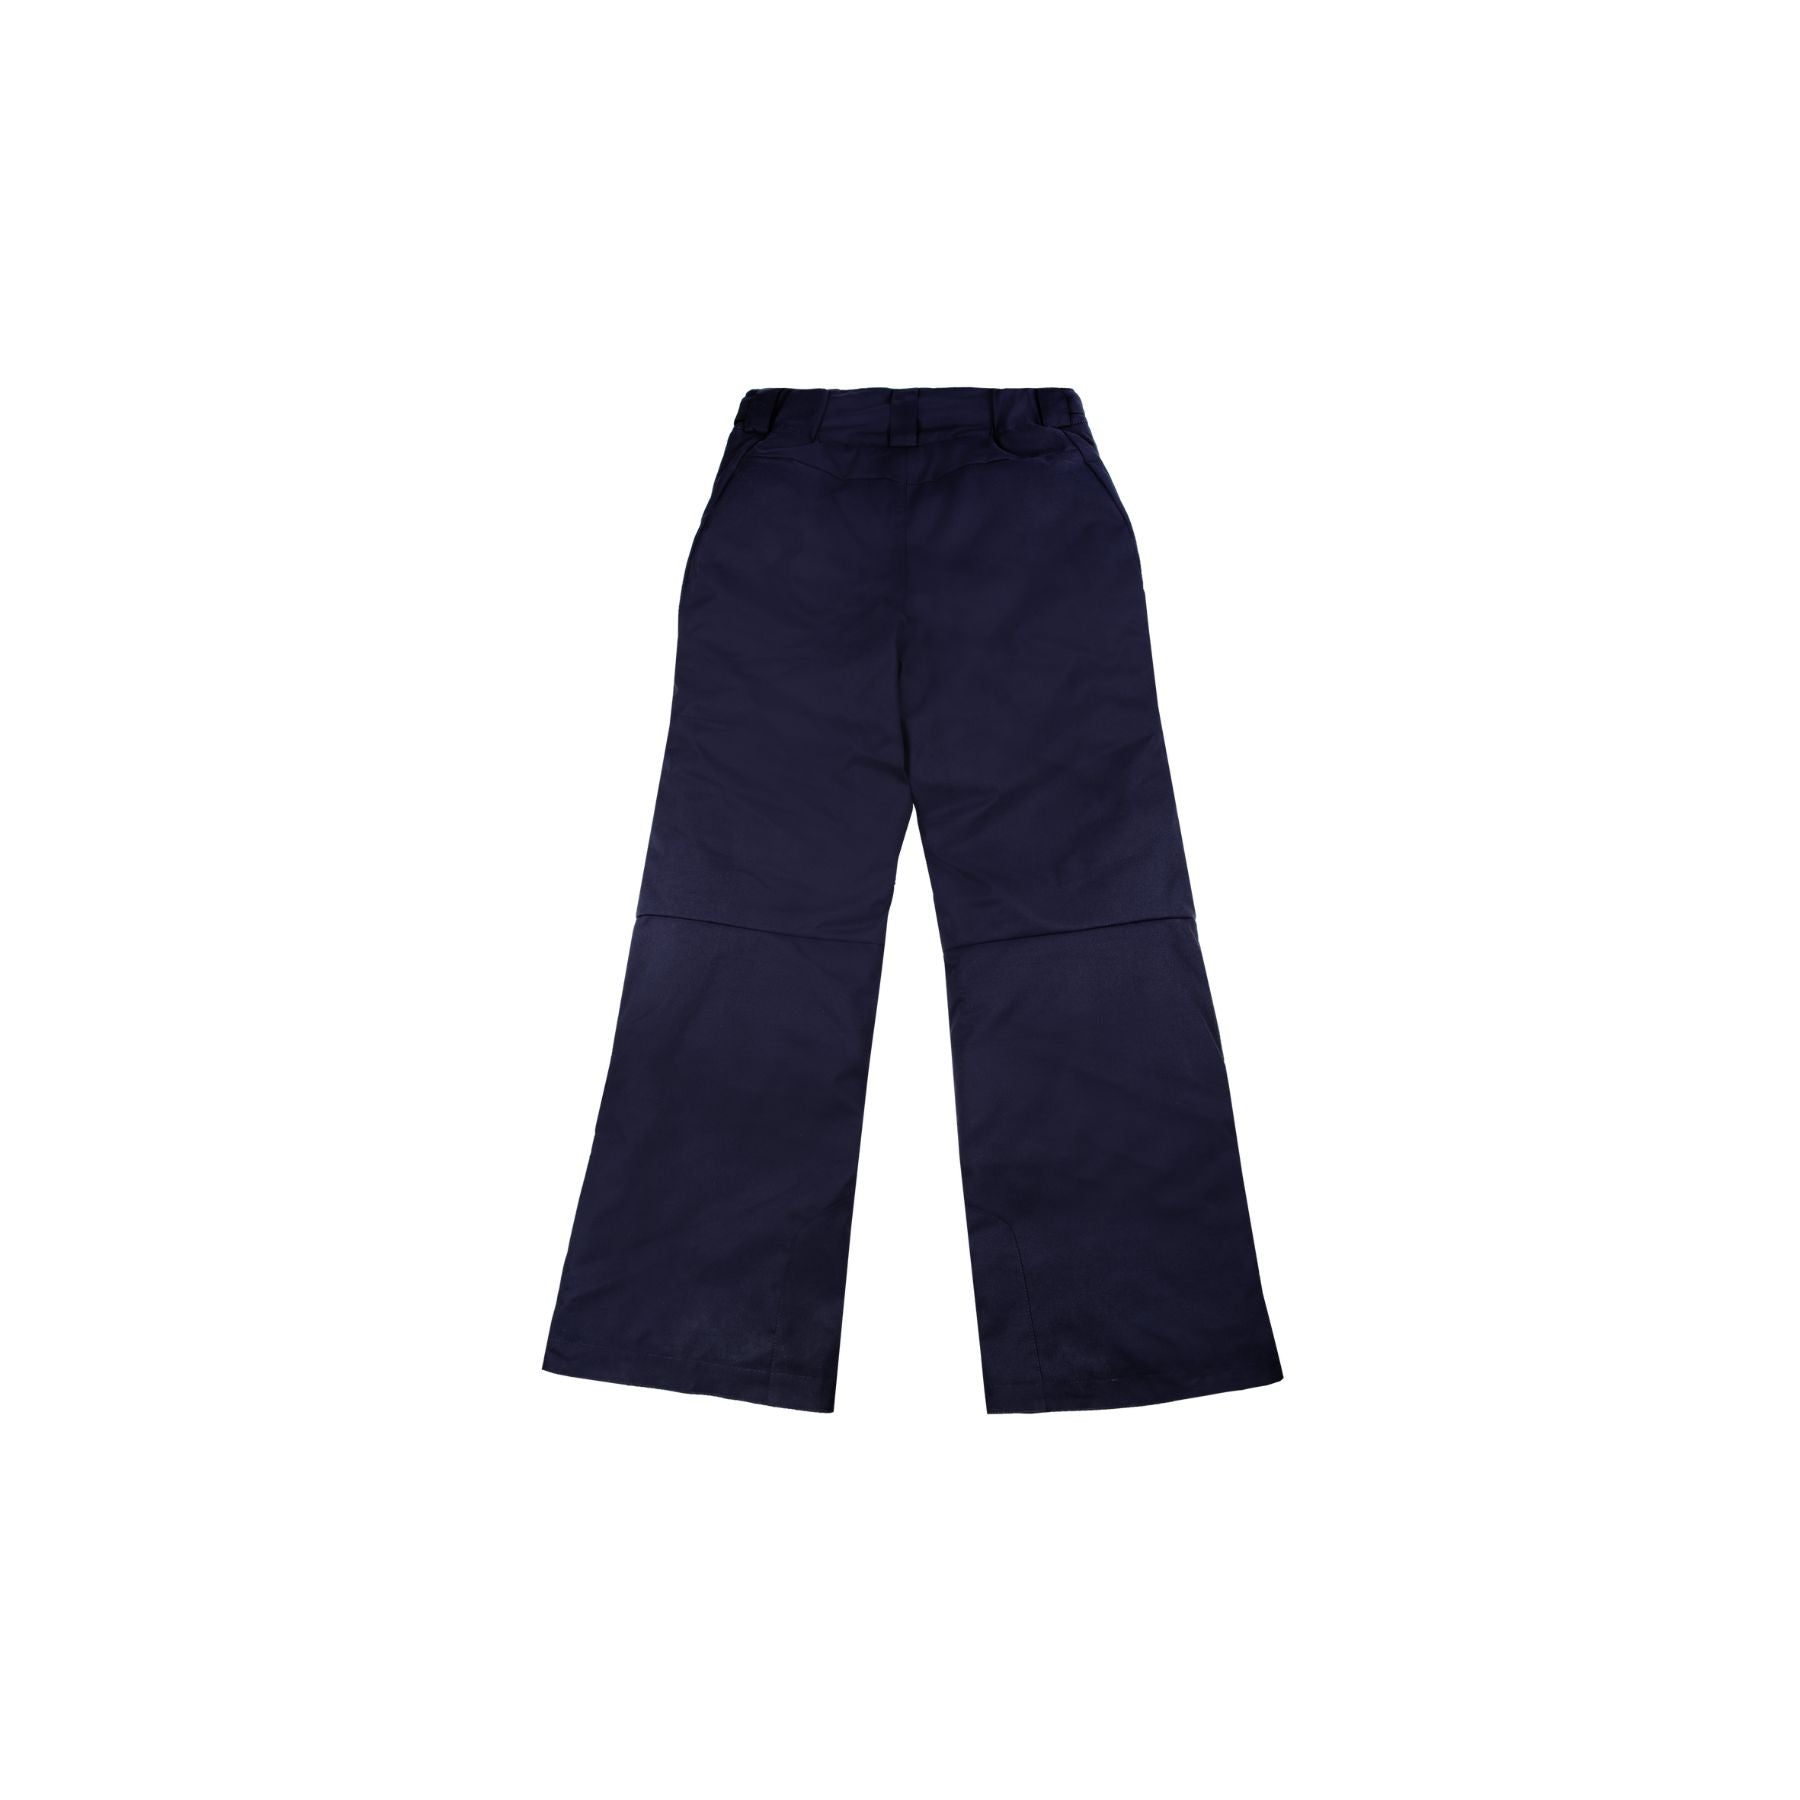 Degré7 Front Ski Pants in Midnight